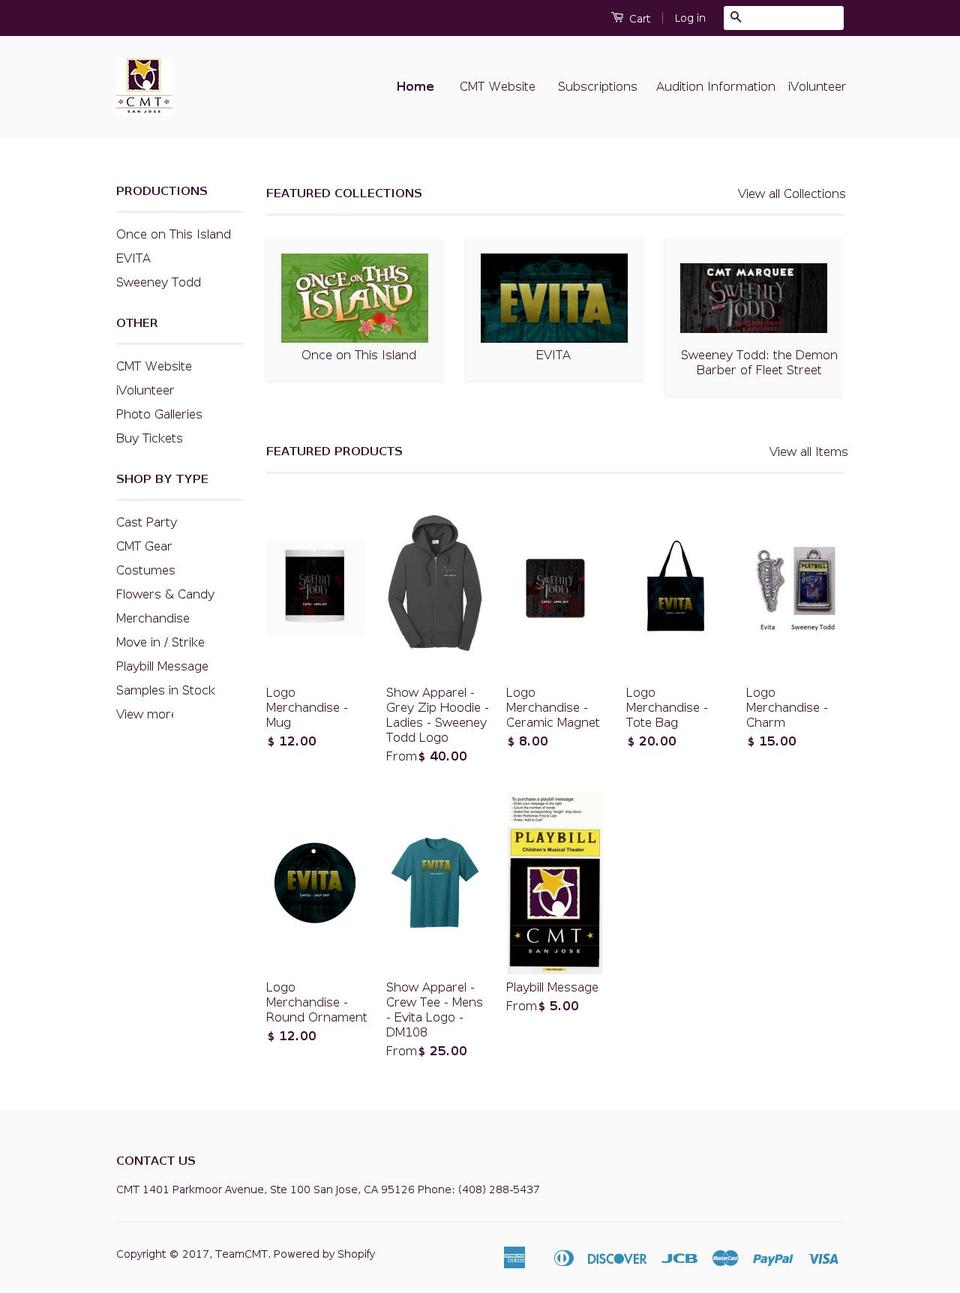 classic Shopify theme site example teamcmt.org